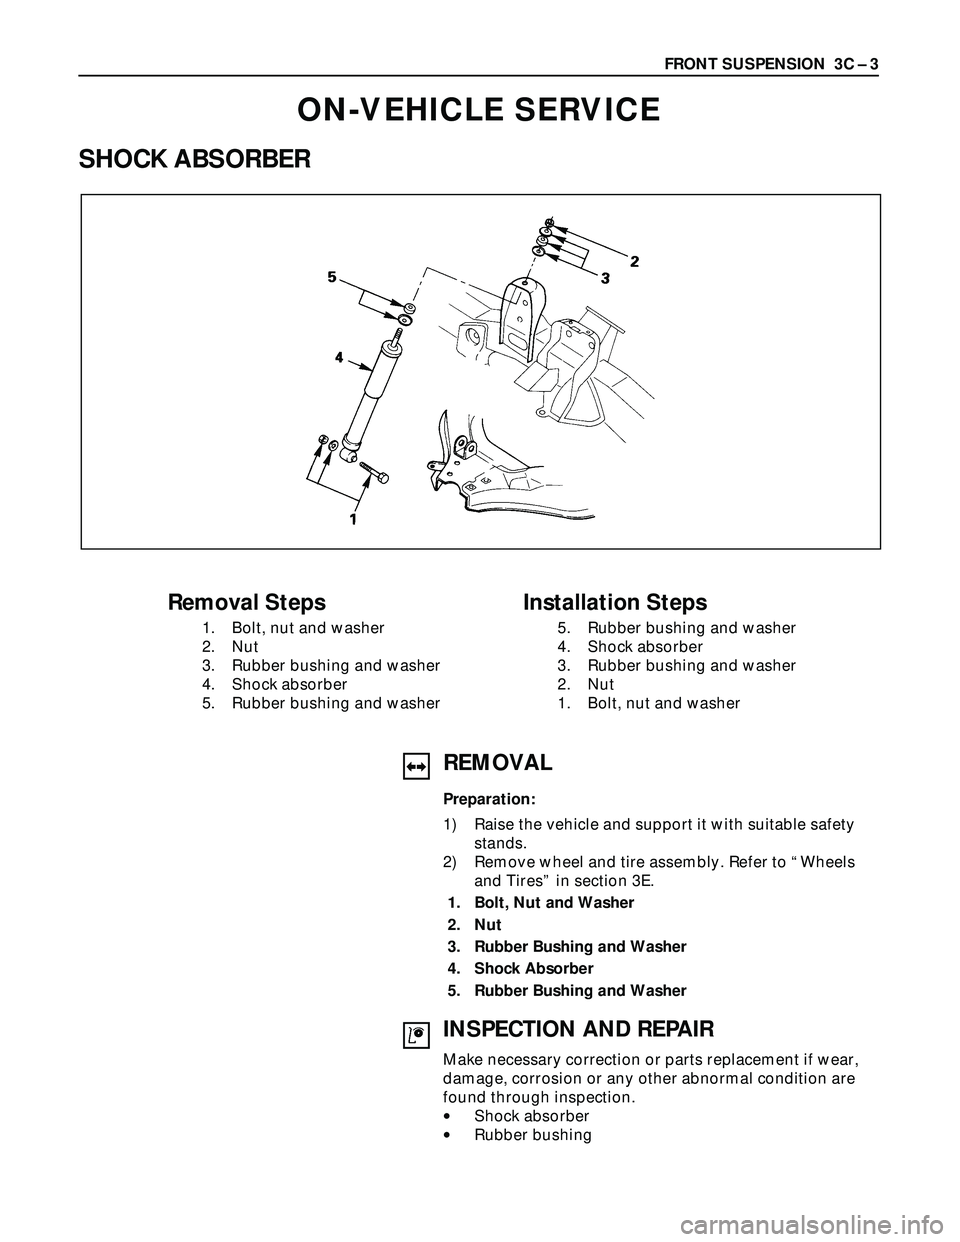 ISUZU TROOPER 1998  Service Repair Manual FRONT SUSPENSION  3C – 3
ON-VEHICLE SERVICE
SHOCK ABSORBER
Removal Steps
1. Bolt, nut and washer
2. Nut
3. Rubber bushing and washer
4. Shock absorber
5. Rubber bushing and washer
Installation Steps